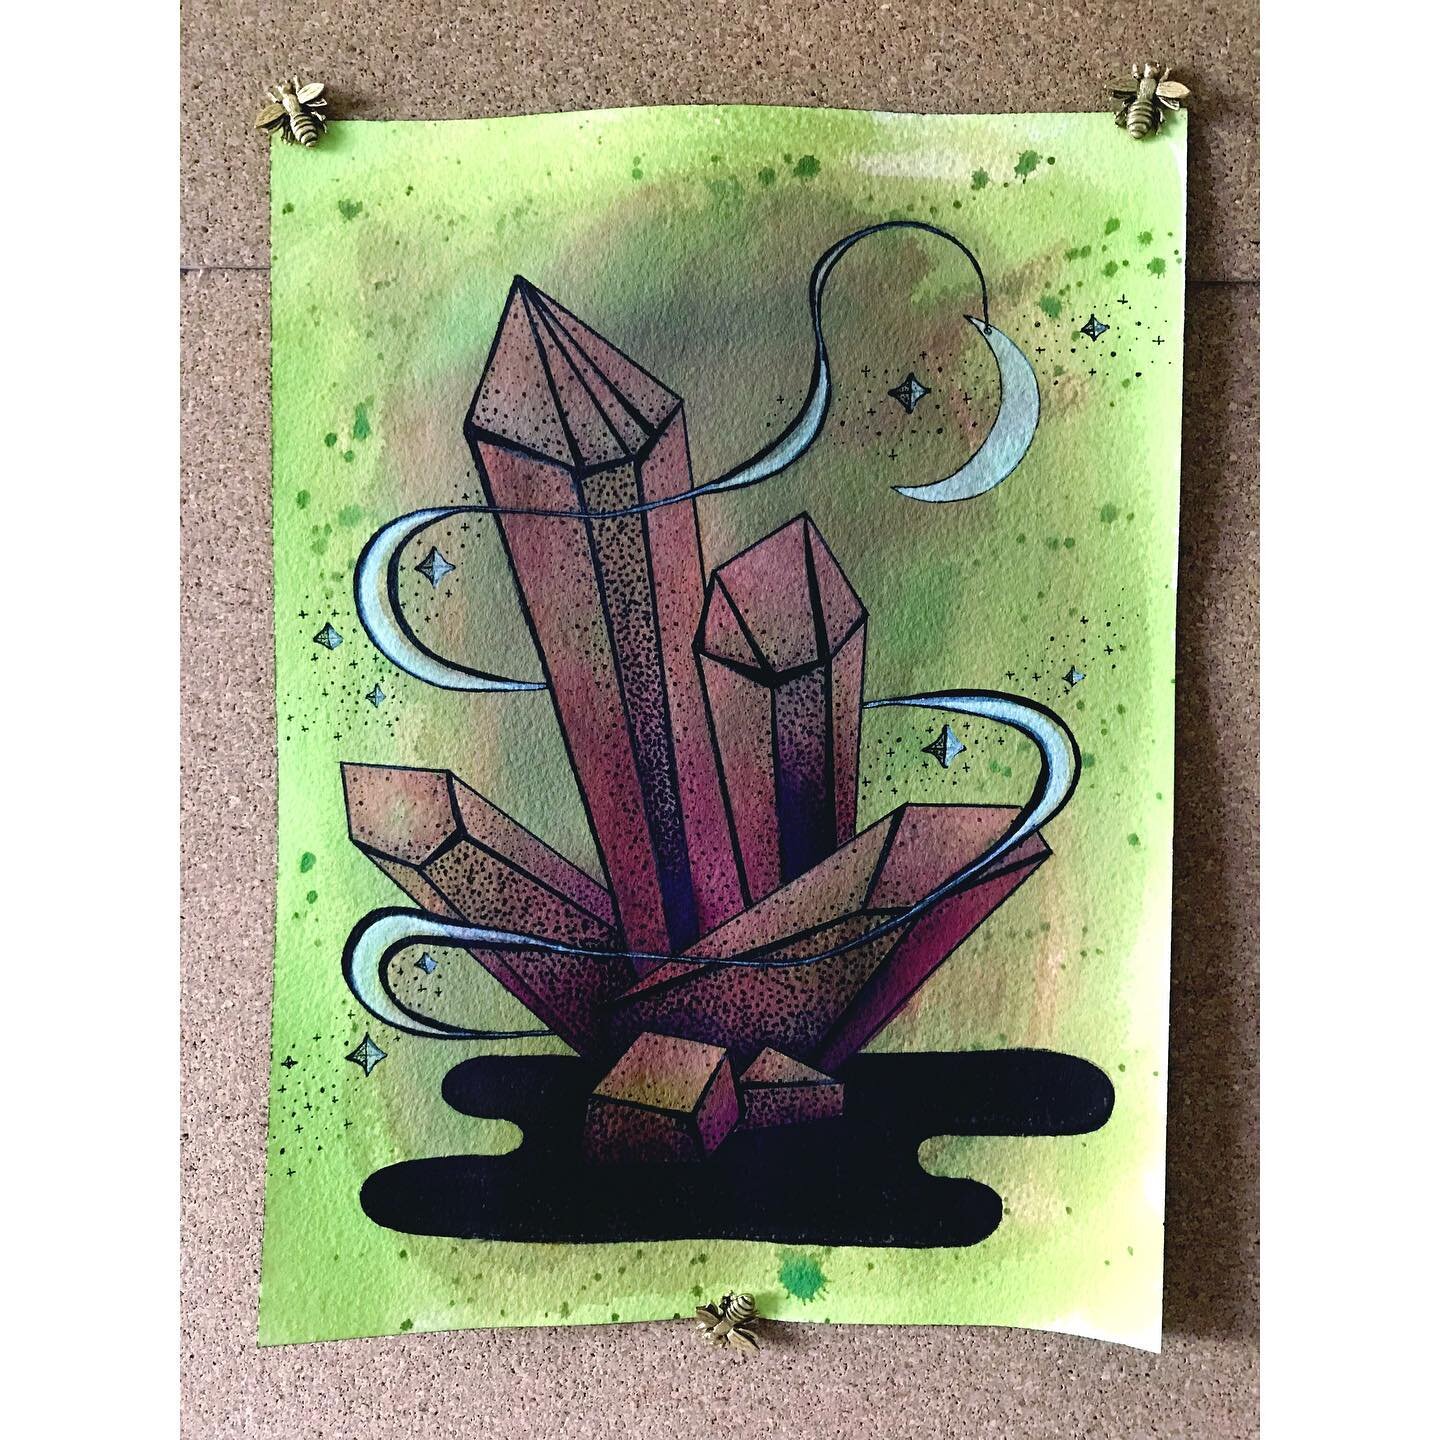 It&rsquo;s Time To Cleanse Your Energy.

#focusup #crystals #ink #inkdrawings #cleanse #artdirectorlife #artdirector #green #selfcare